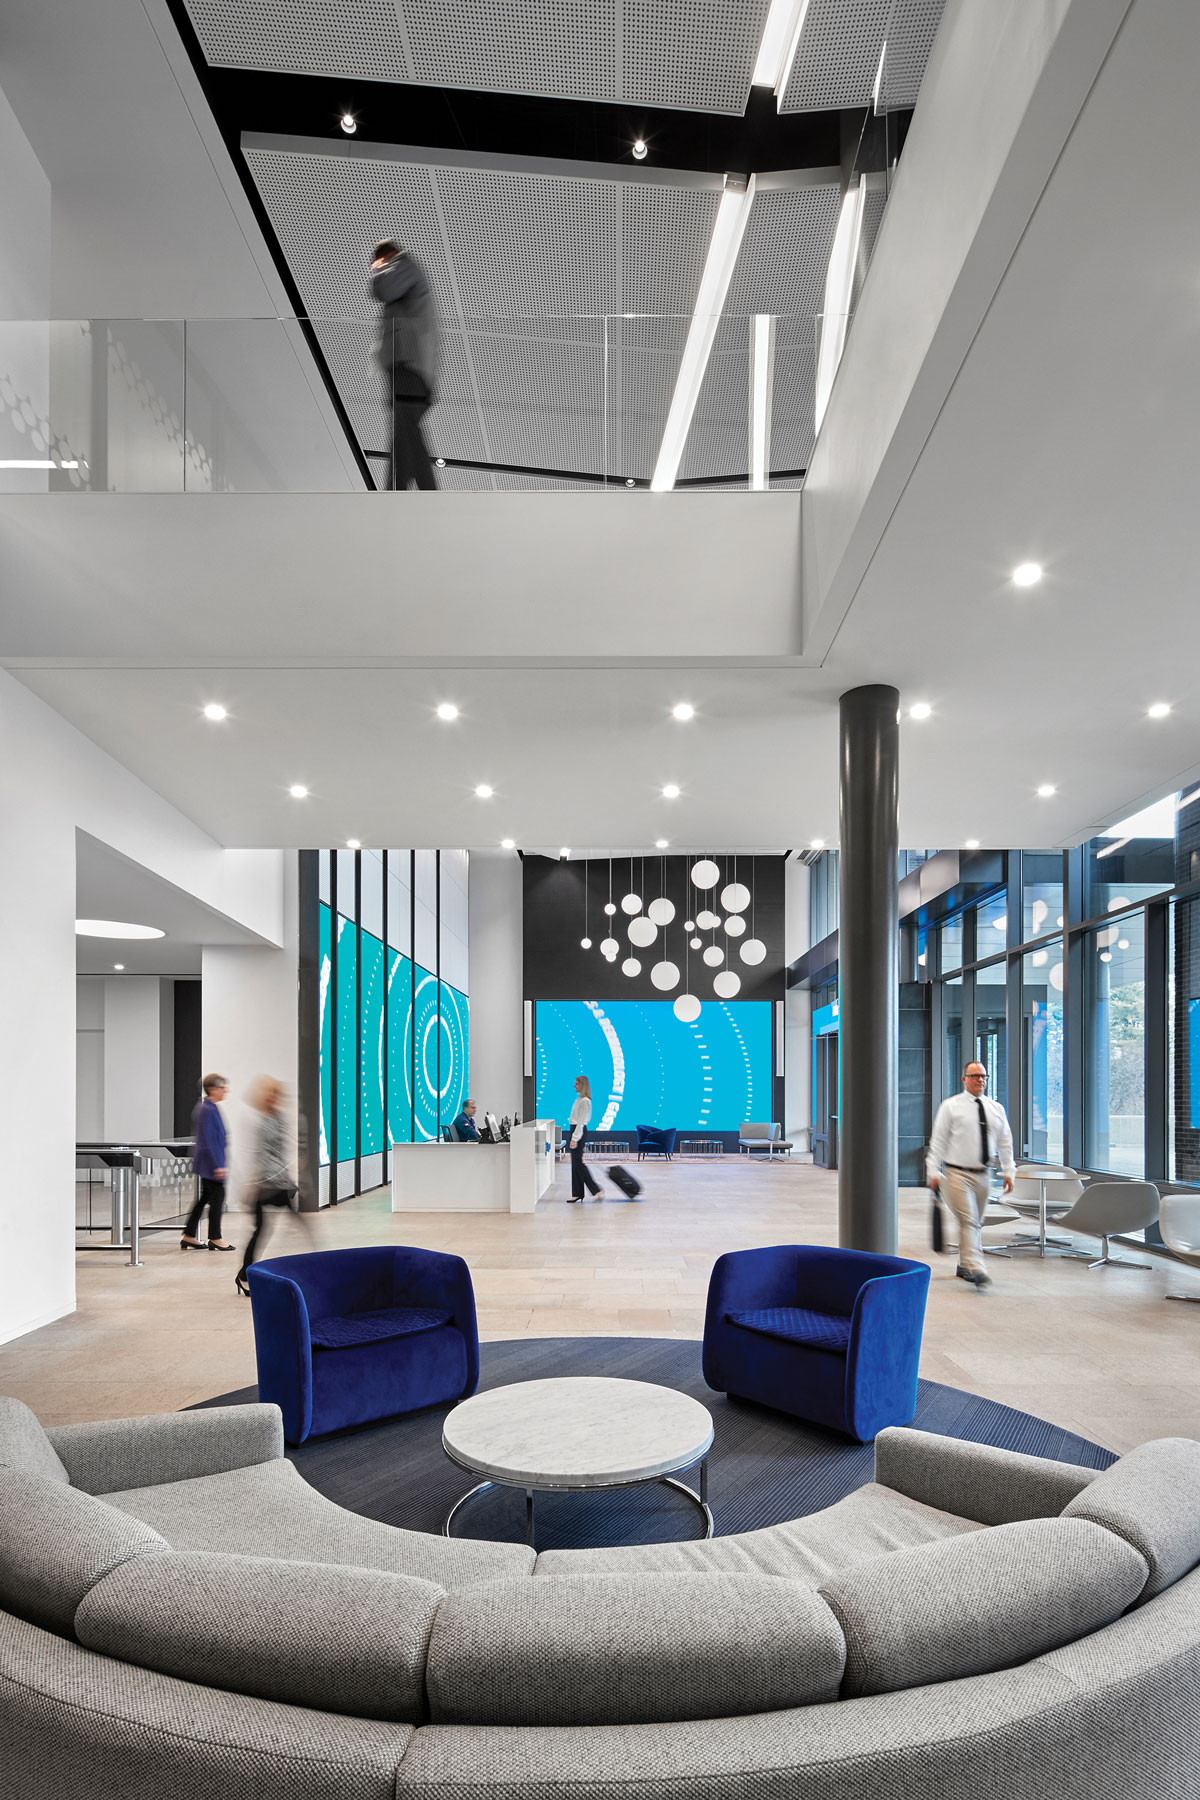 All Together Now: Allergan’s New NJ Headquarters - Structure Tone1200 x 1800